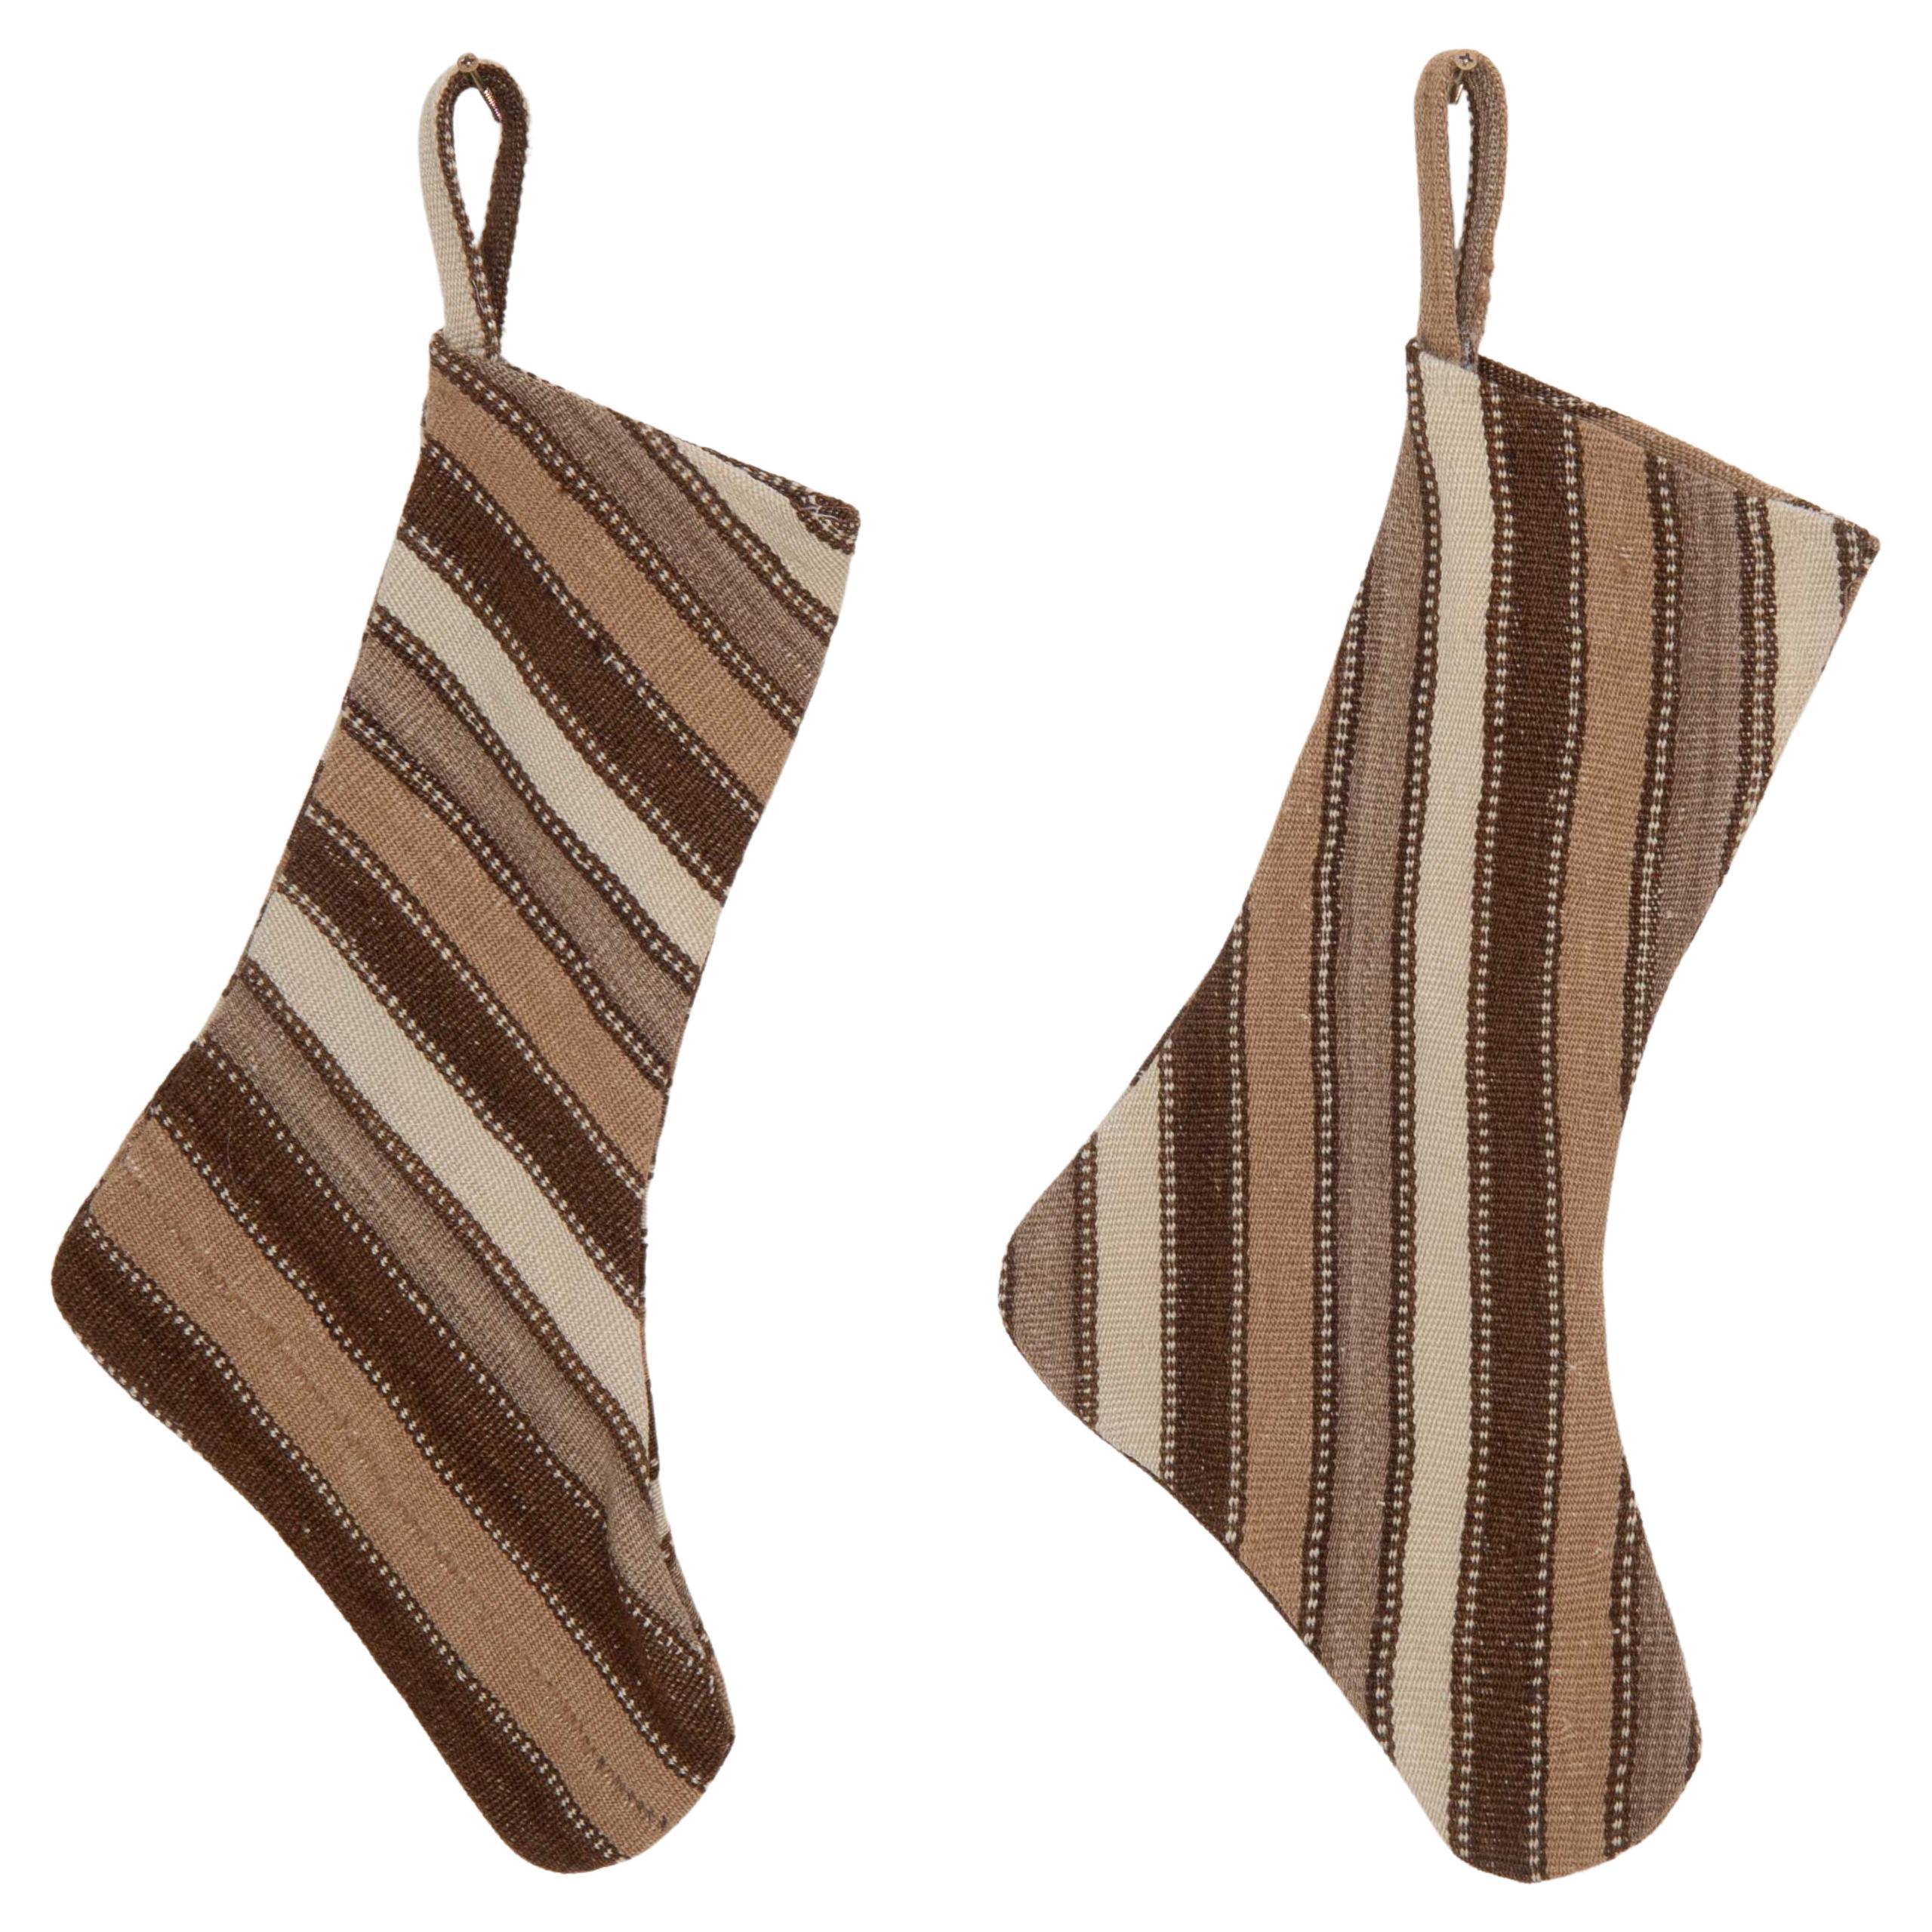 Double Sided Christmas Stockings Made from Vintage Anatolian Kilim Fragments